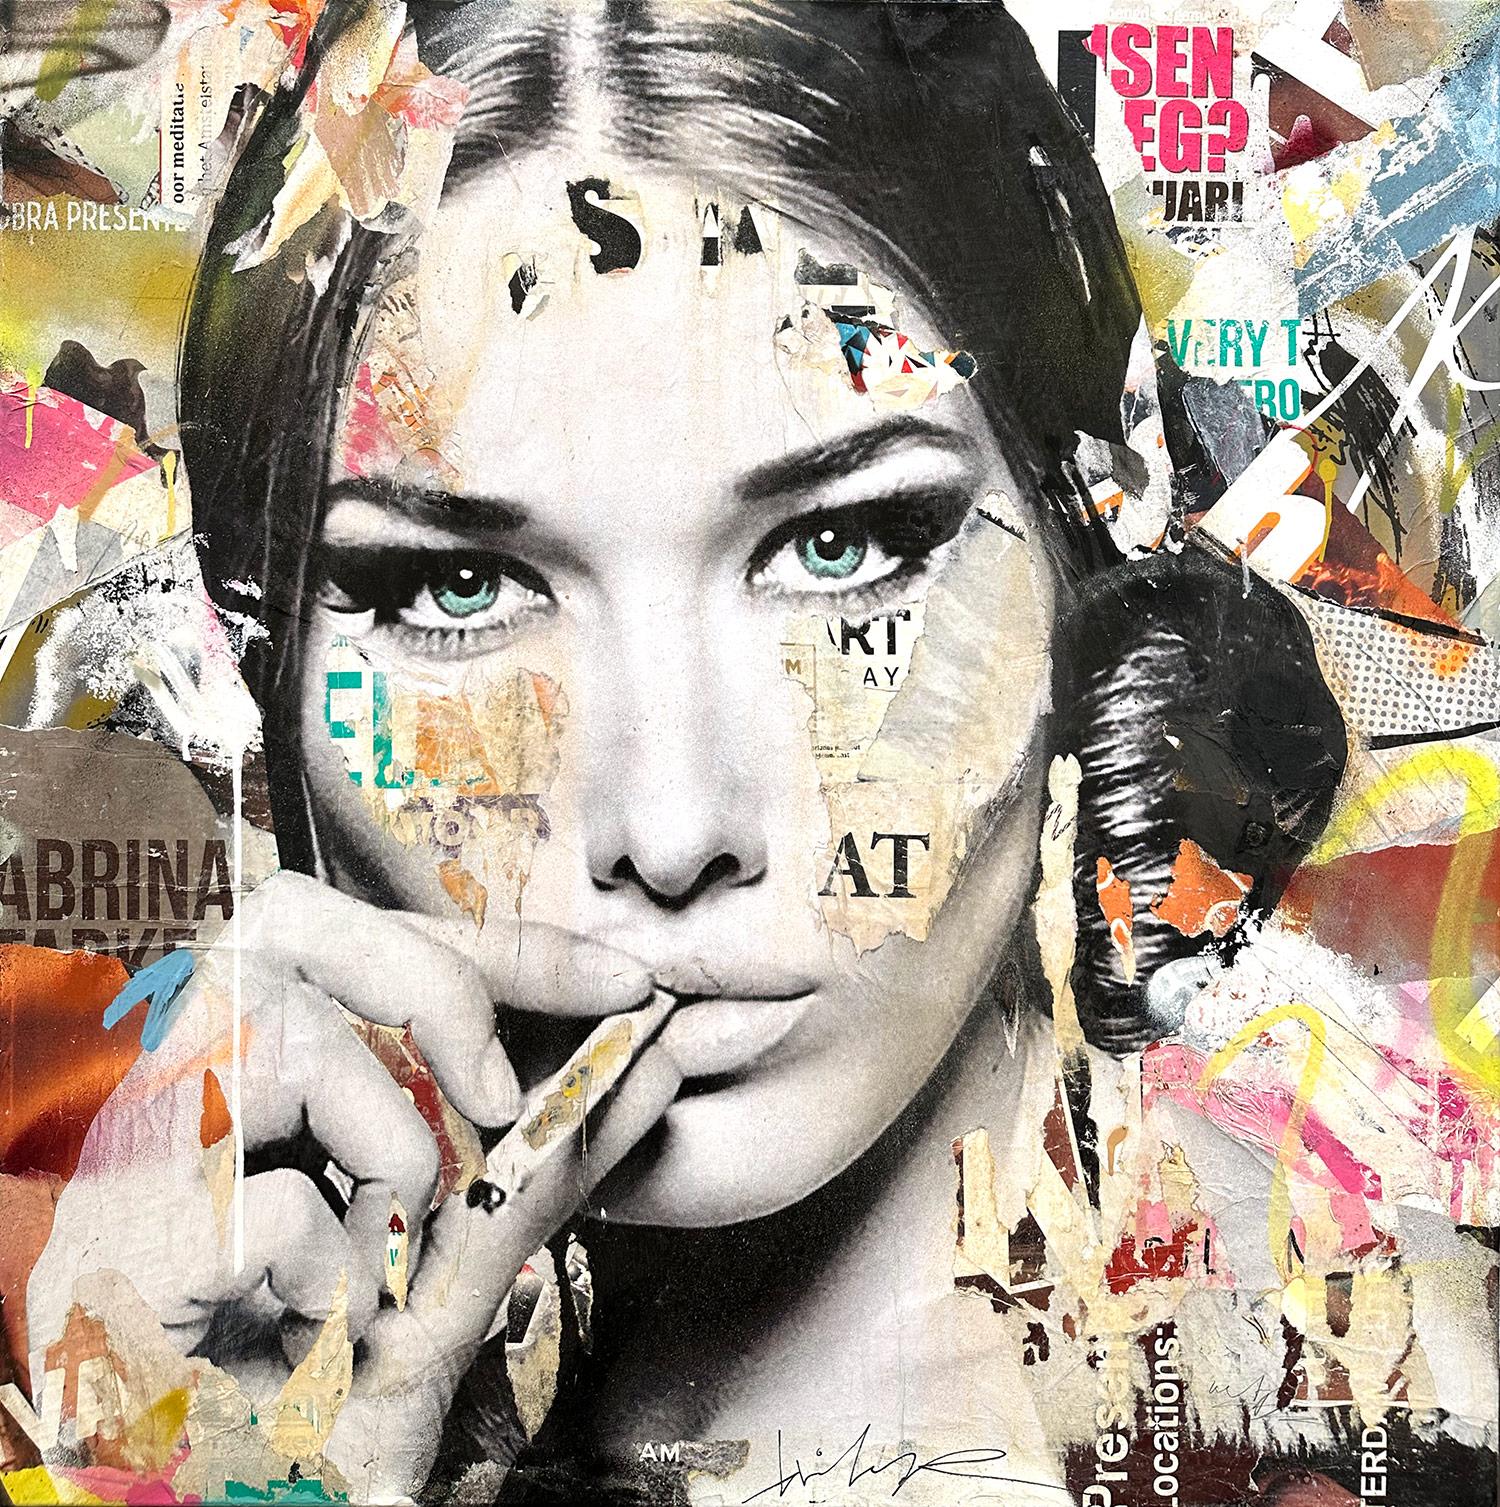 Gieler Abstract Painting – "Carla Is Smokin' Hot" Carla Bruni Colorful Pop Art Portrait Painting on Canvas